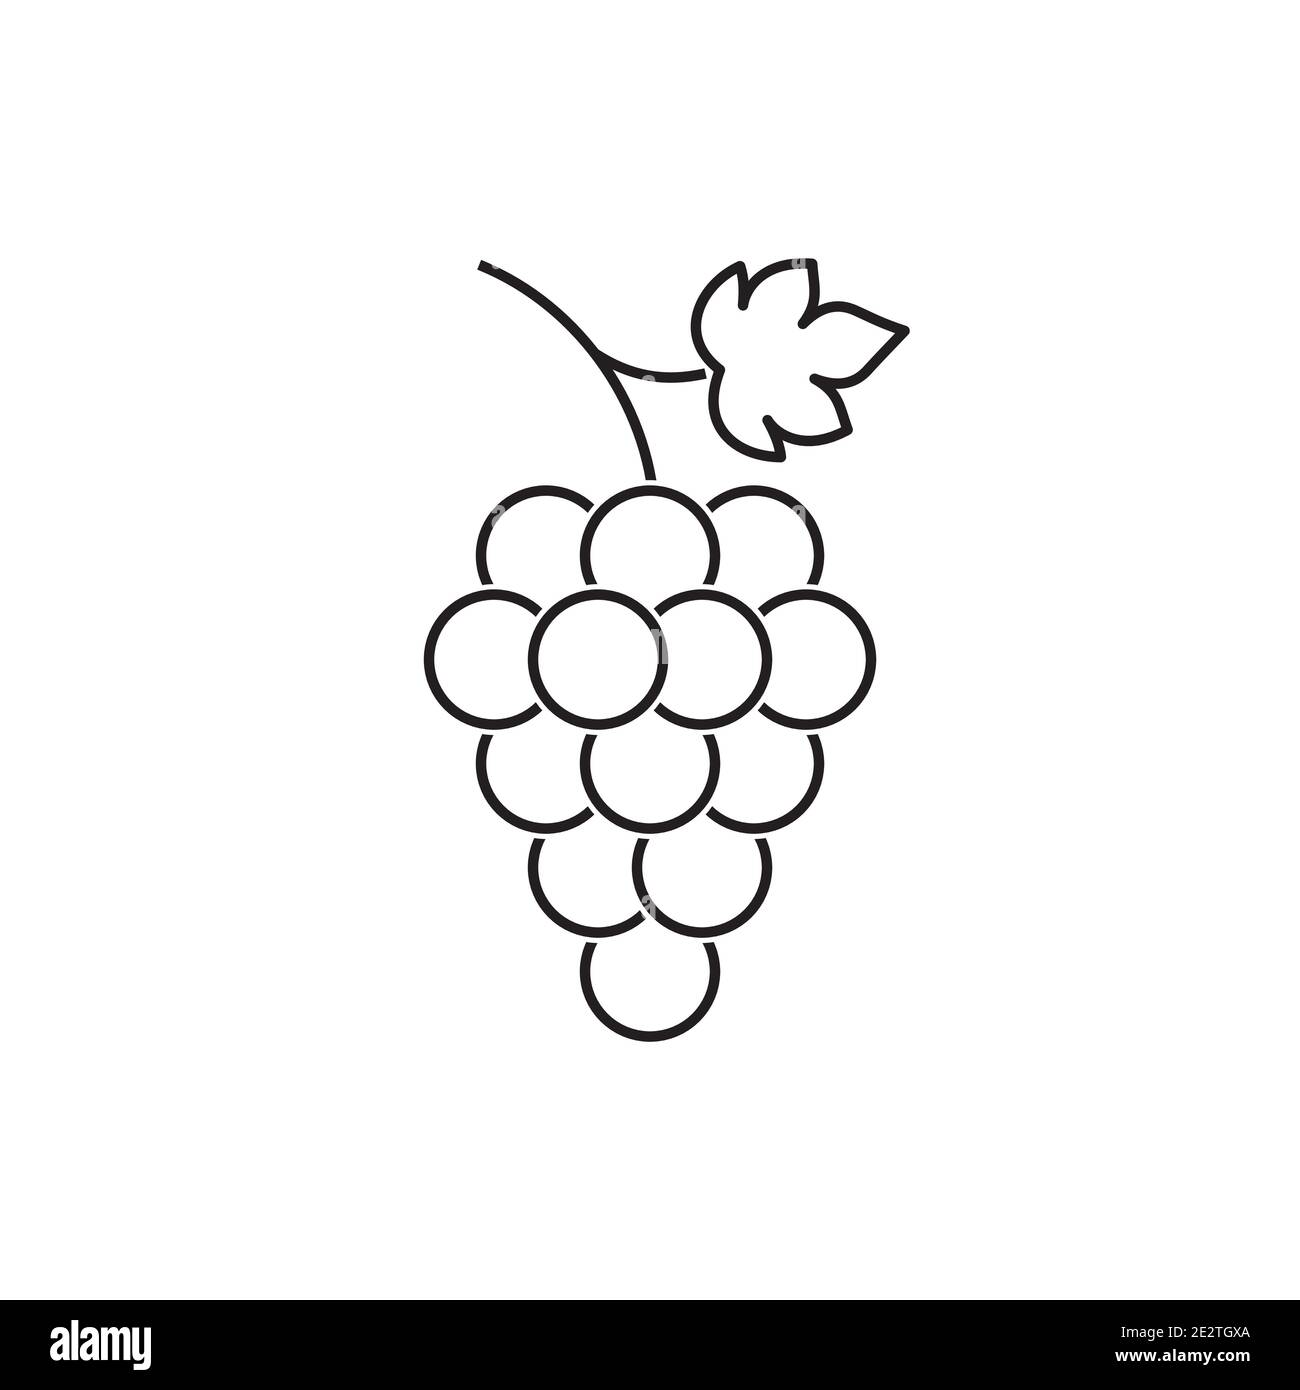 Bunch of grapes fruit with leaf vector icon Stock Vector